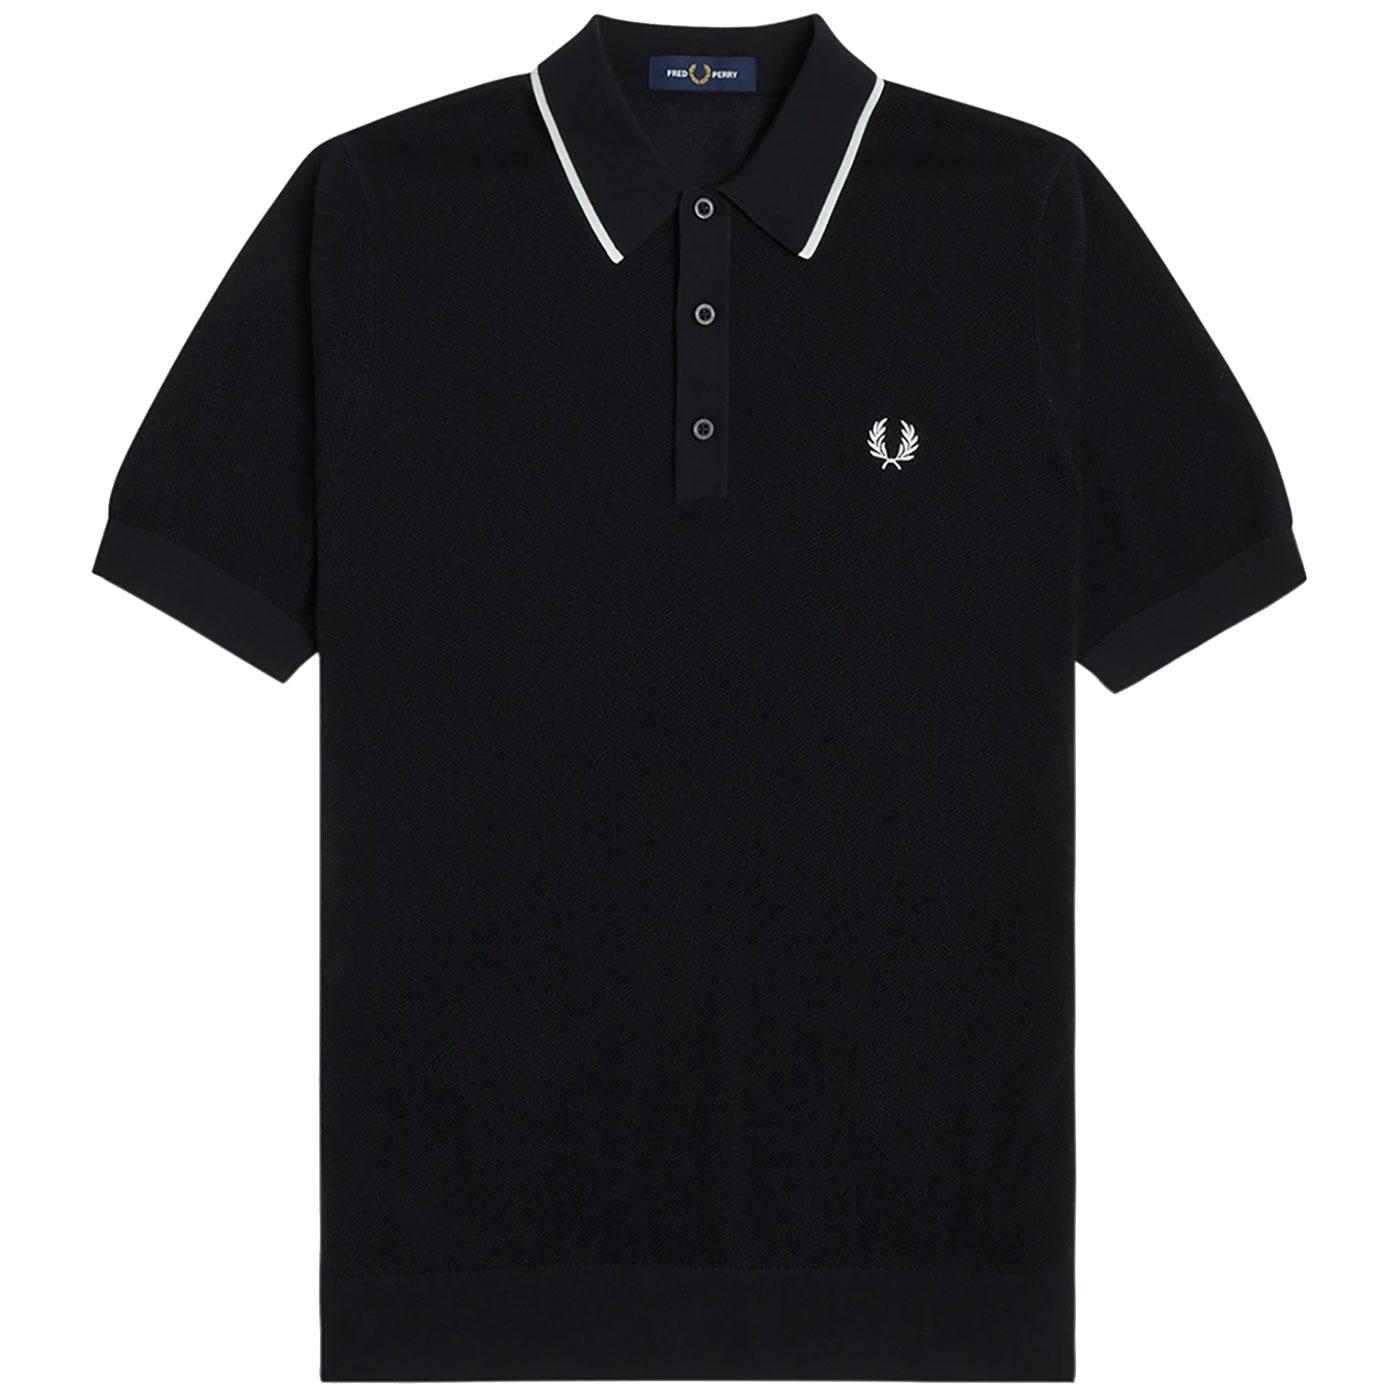 FRED PERRY Tipped Texture Knit Mod Polo Shirt in Black